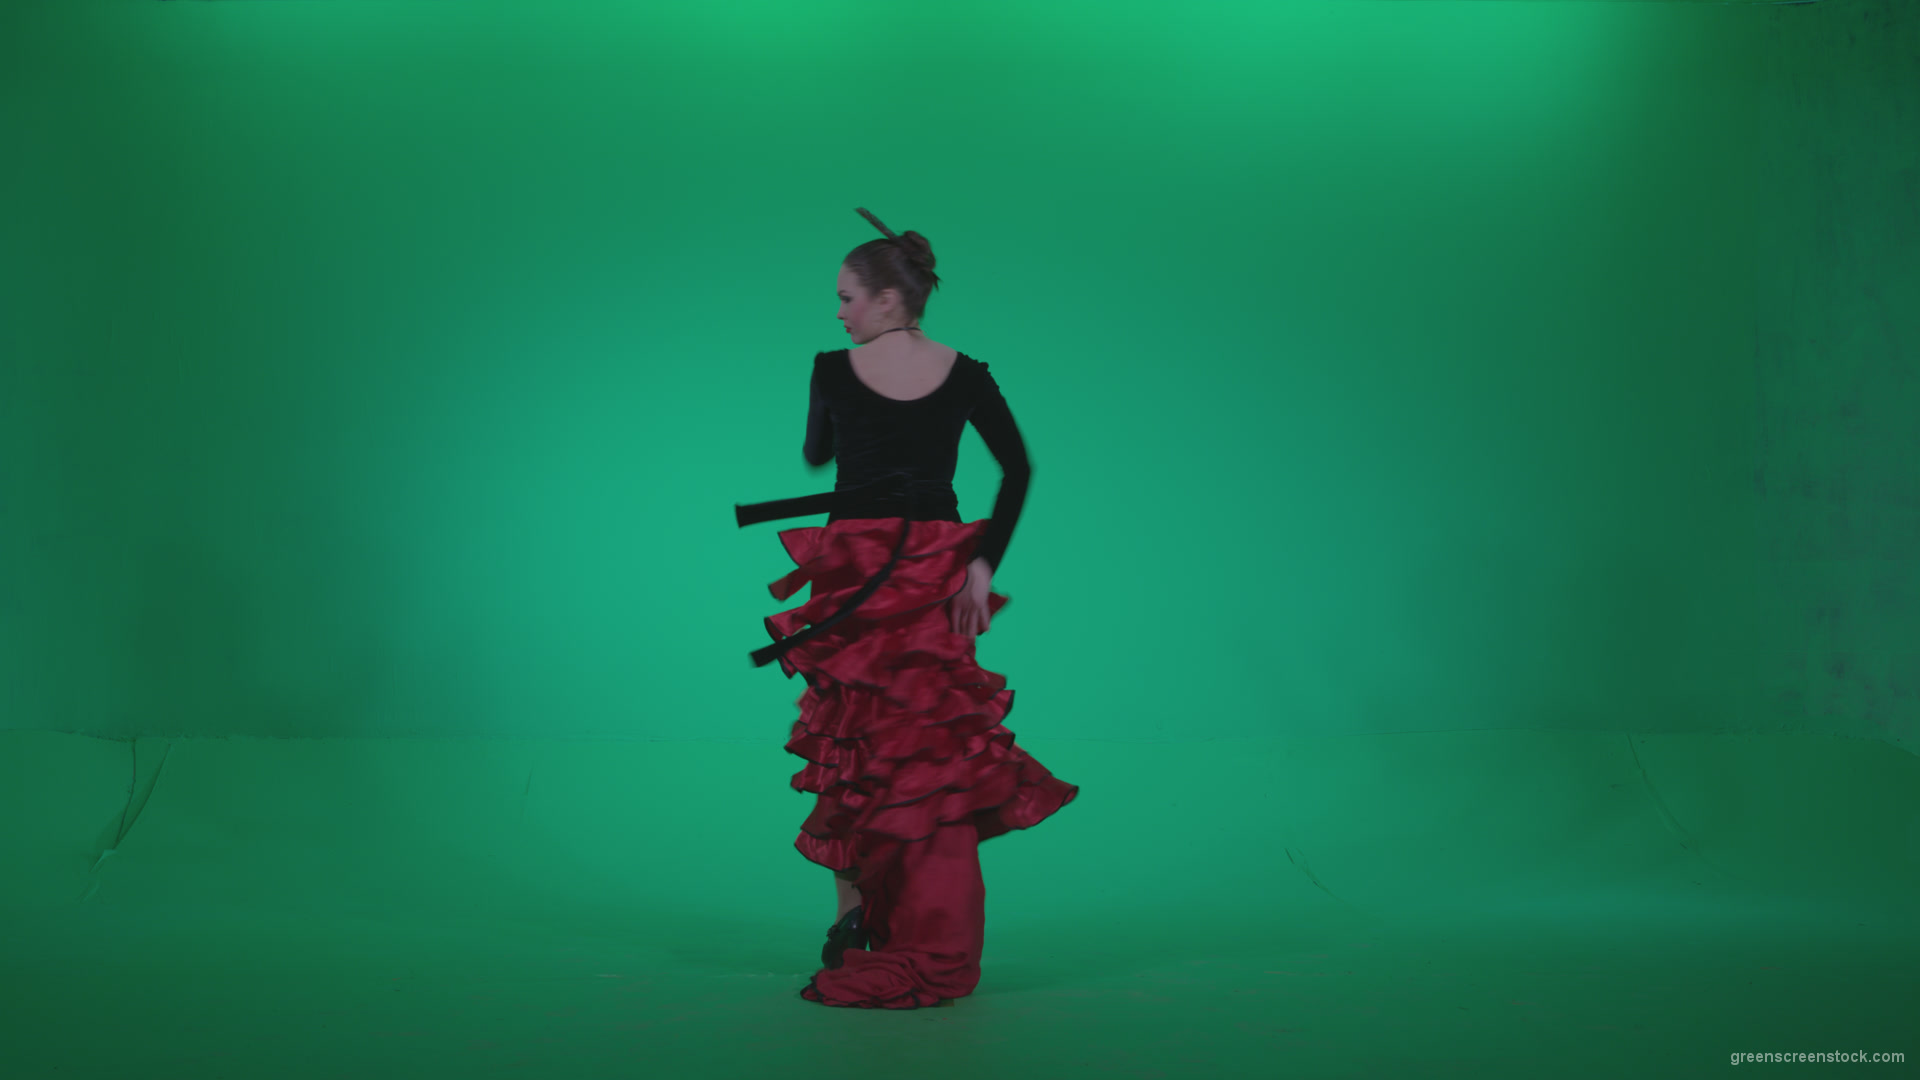 Flamenco-Red-and-Black-Dress-rb12-Green-Screen-Video-Footage_004 Green Screen Stock